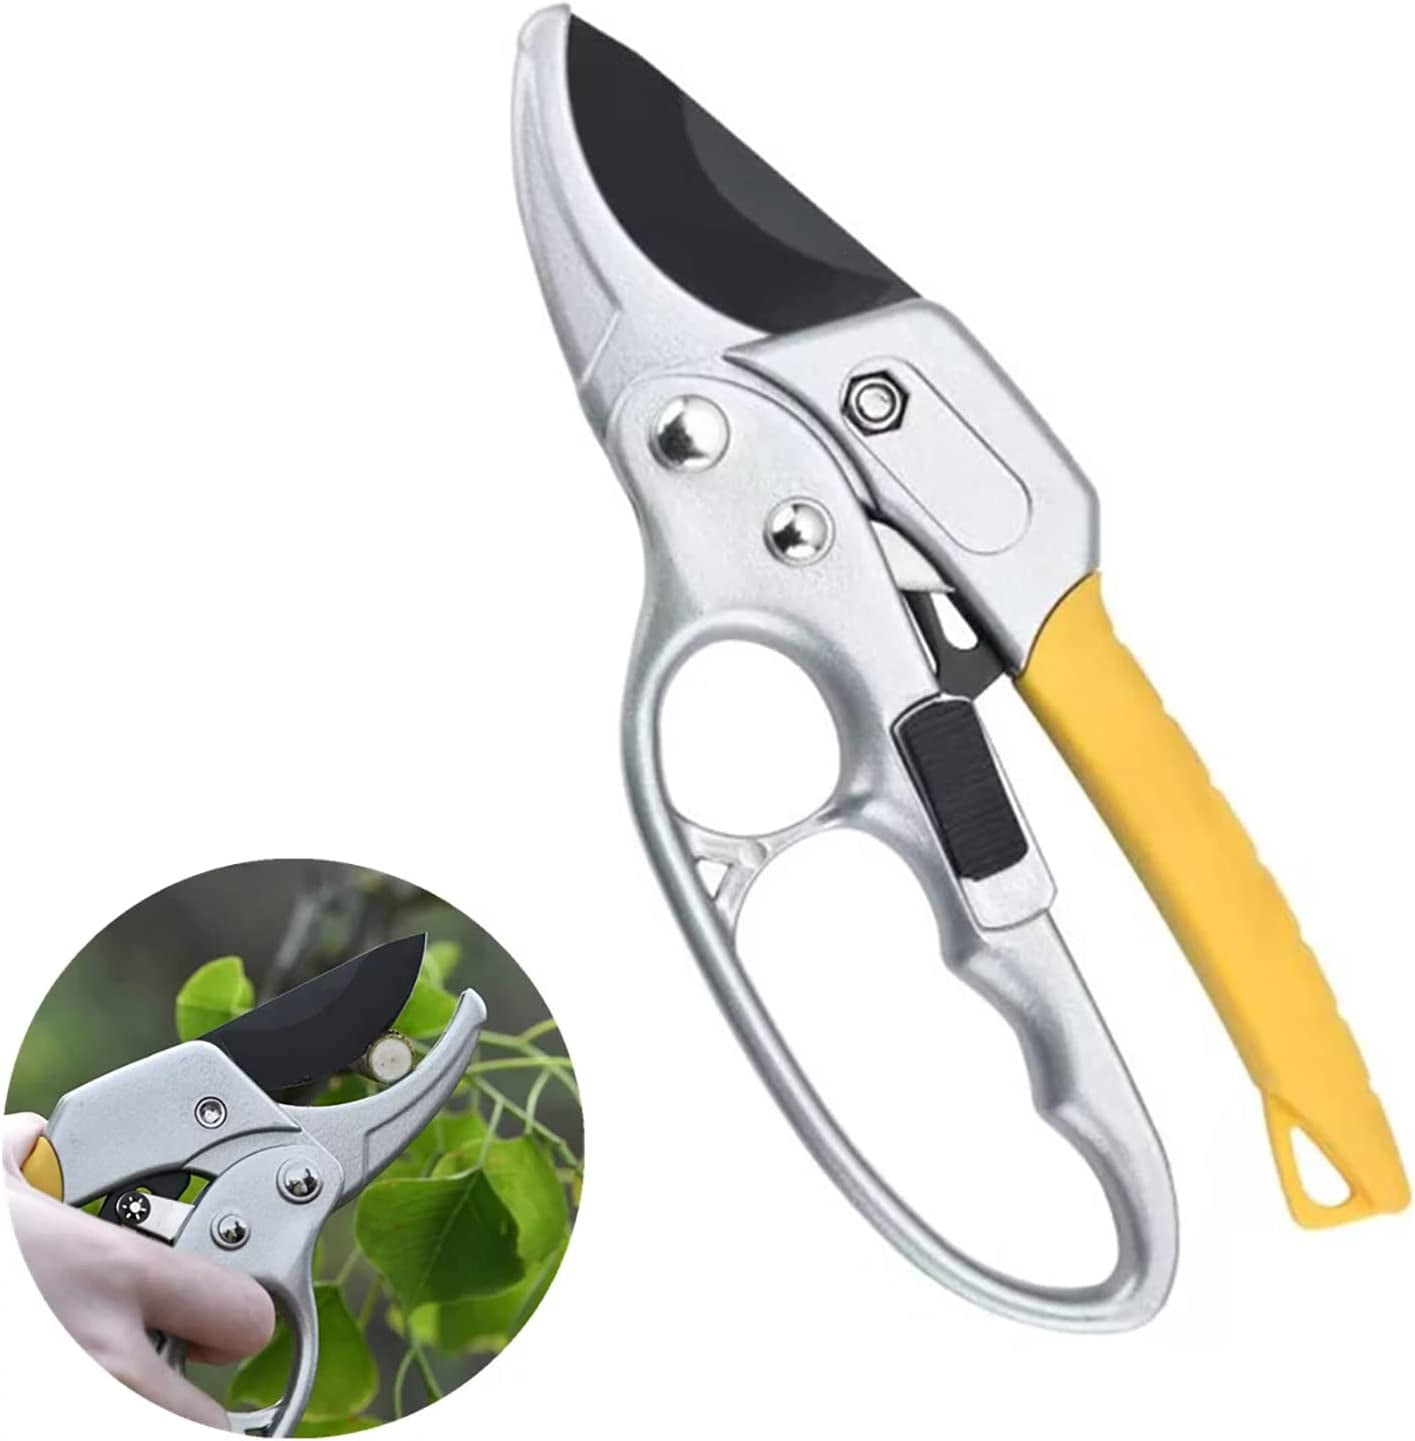 Wesoke Garden Pruning Shears, Plant Cutting Scissors Handheld Gardening  Clippers, Heavy Duty Hand Bypass Pruner with Stainless Steel Blades for